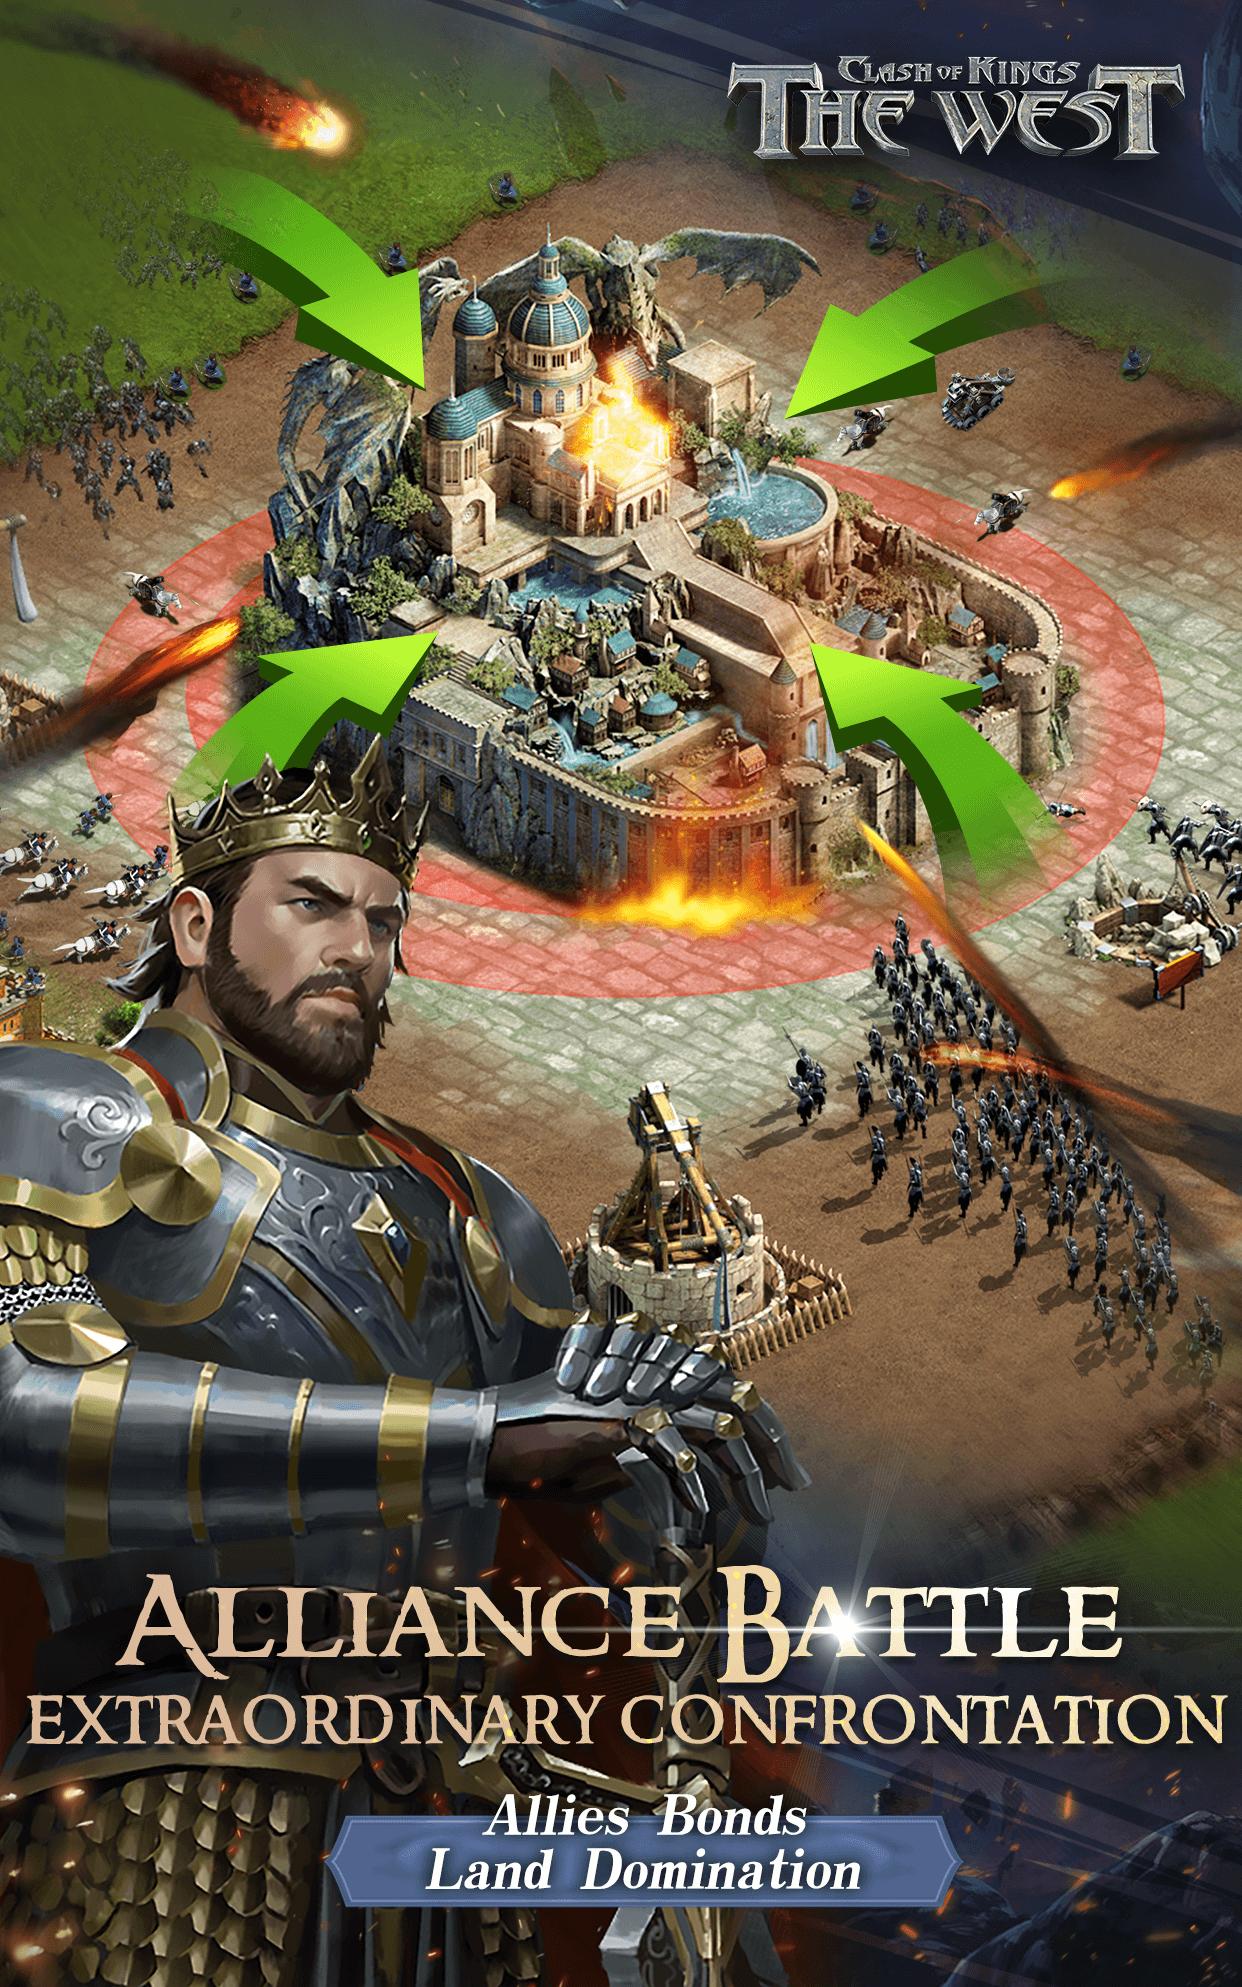 Clash of Kings - Good News! Clash of Kings PC version has updated